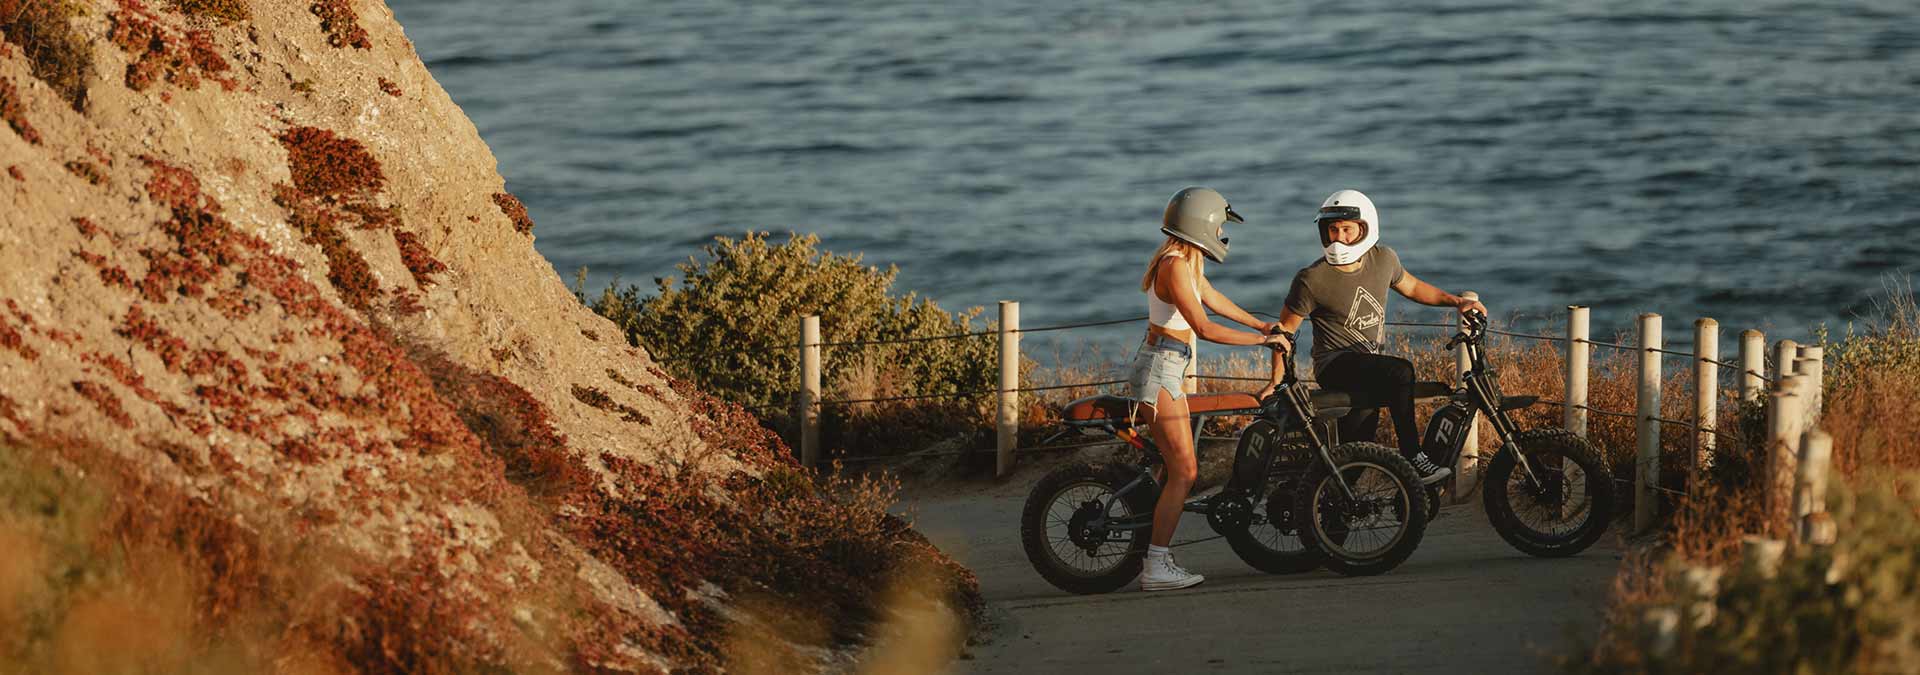 Two riders sitting on SUPER73 ebikes on the street in front of the ocean